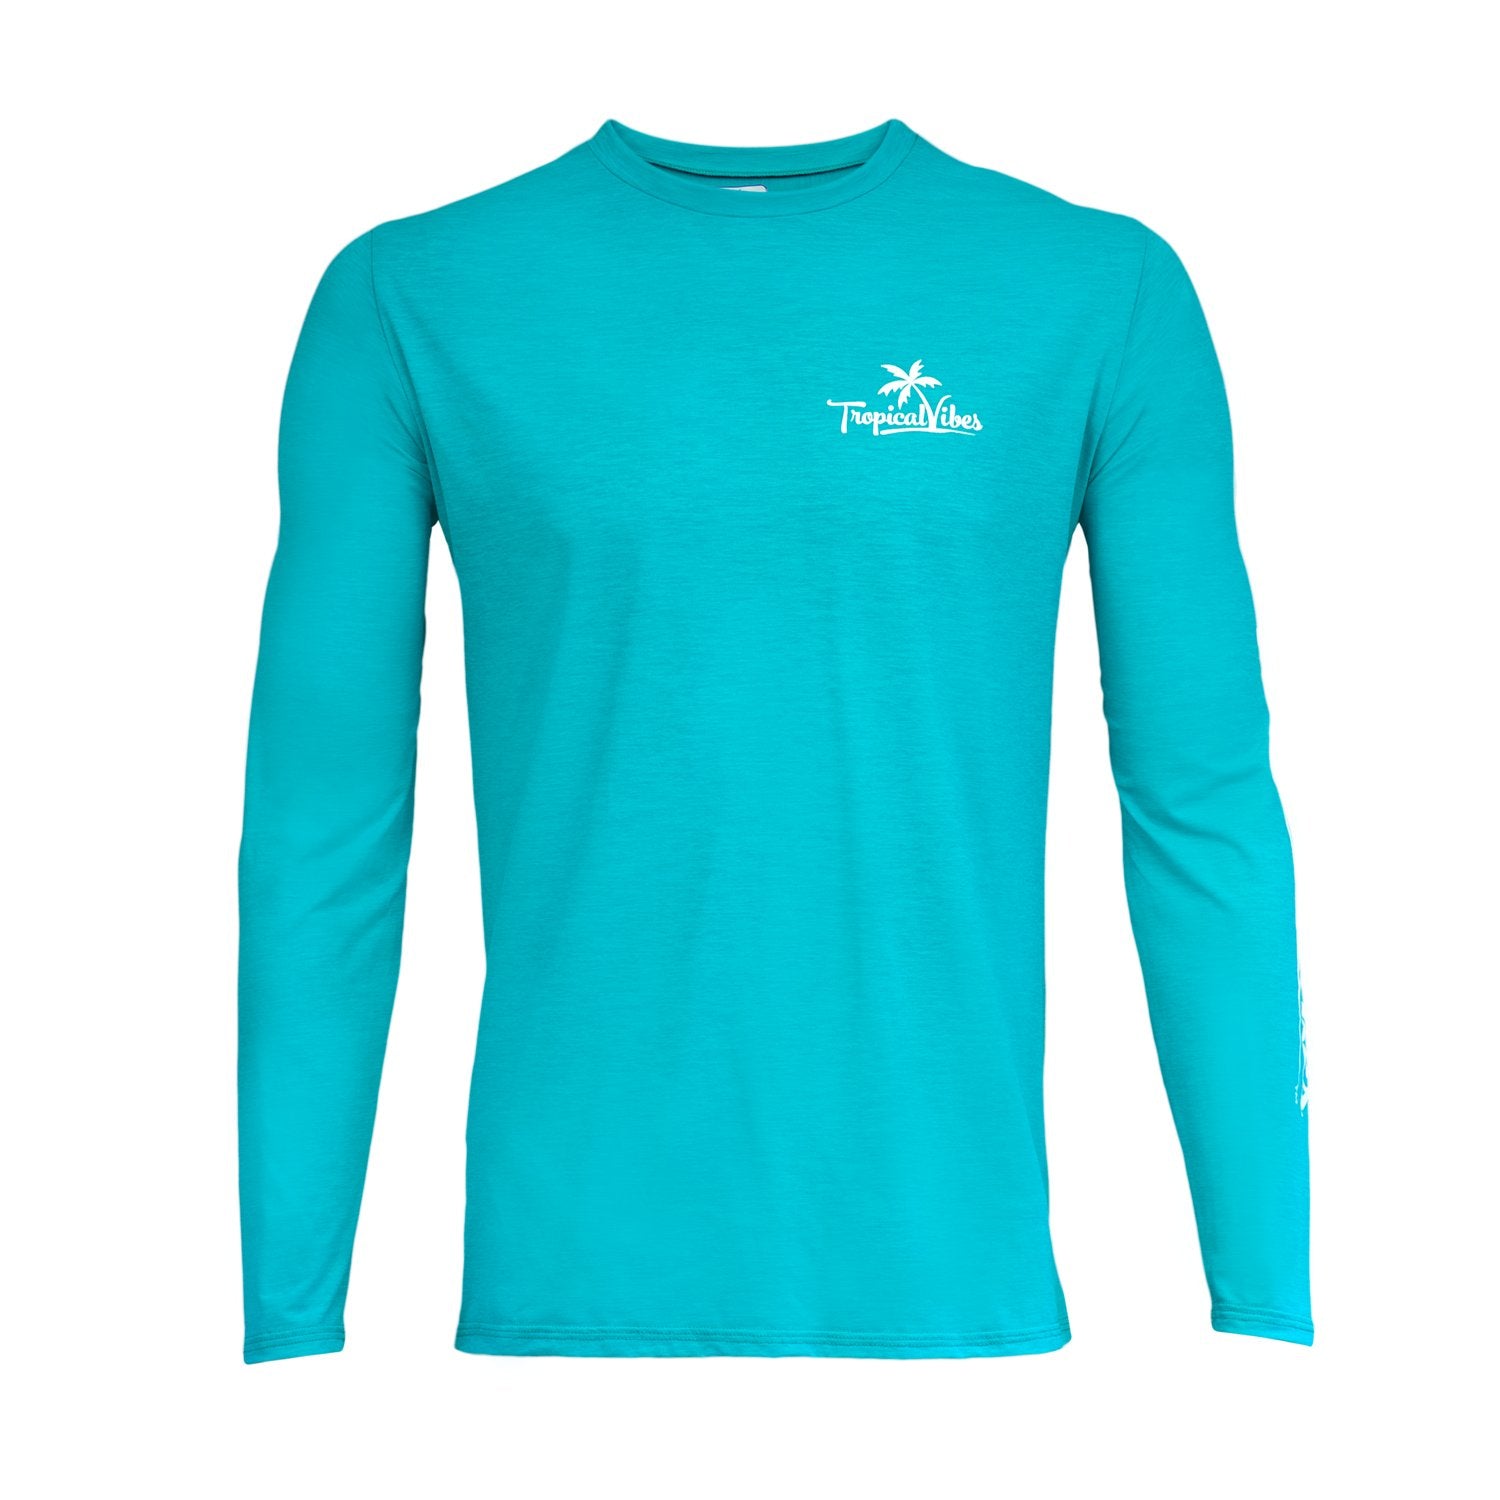 Tropical Vibes Men's UPF 30+ Sun Protection Long Sleeve Quick Dry